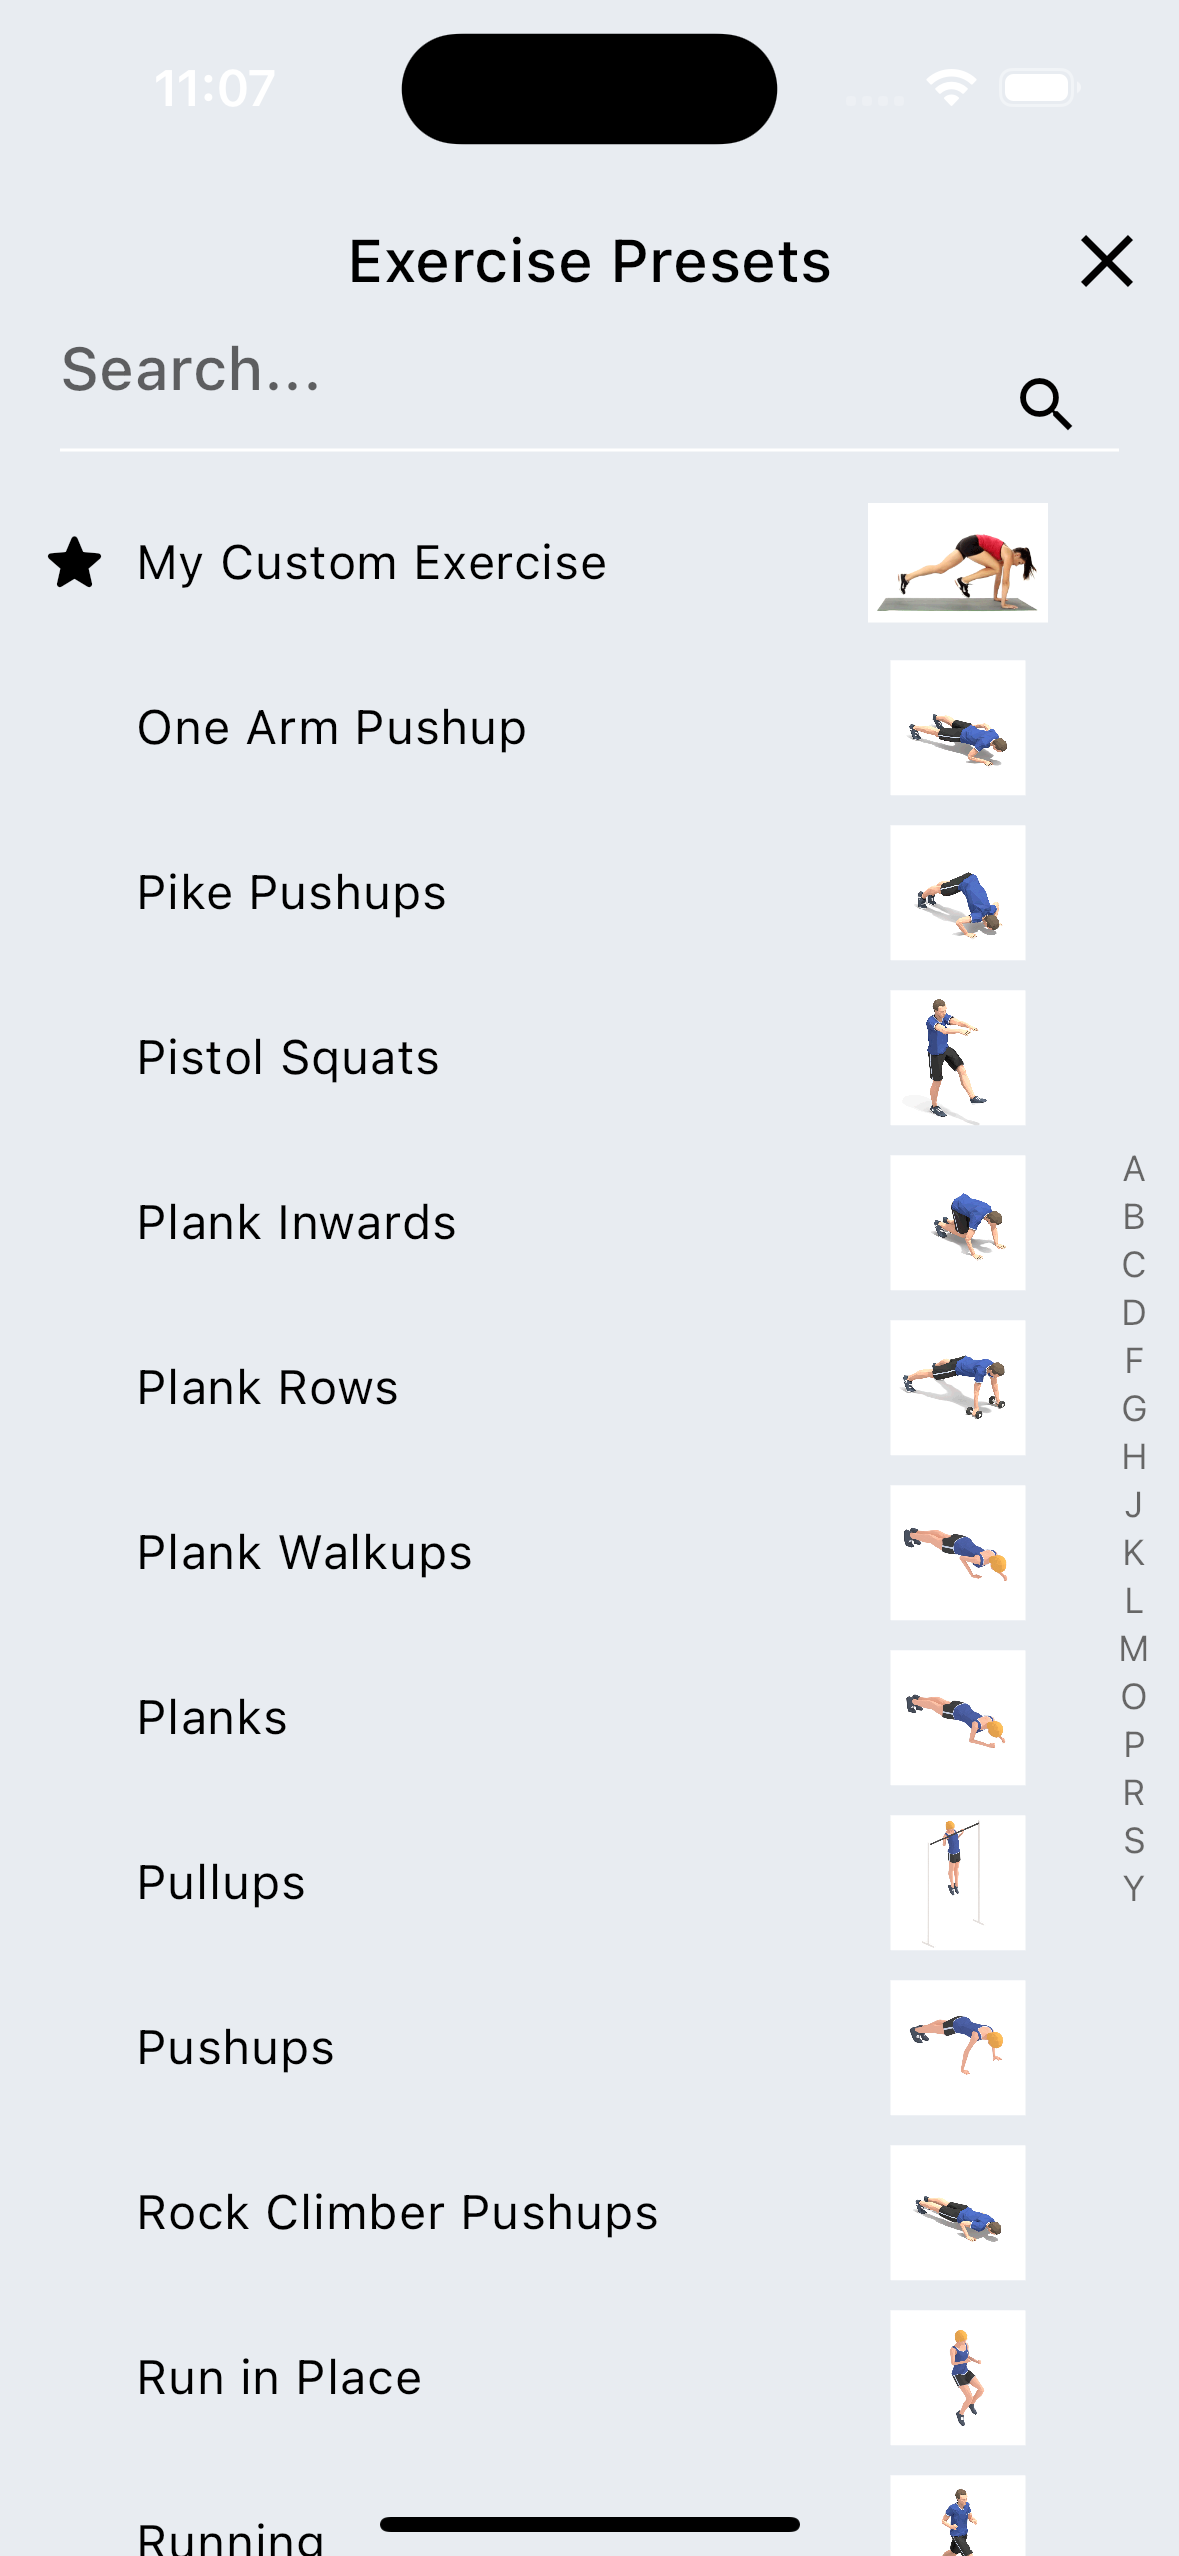 Use Presets or Save Exercises